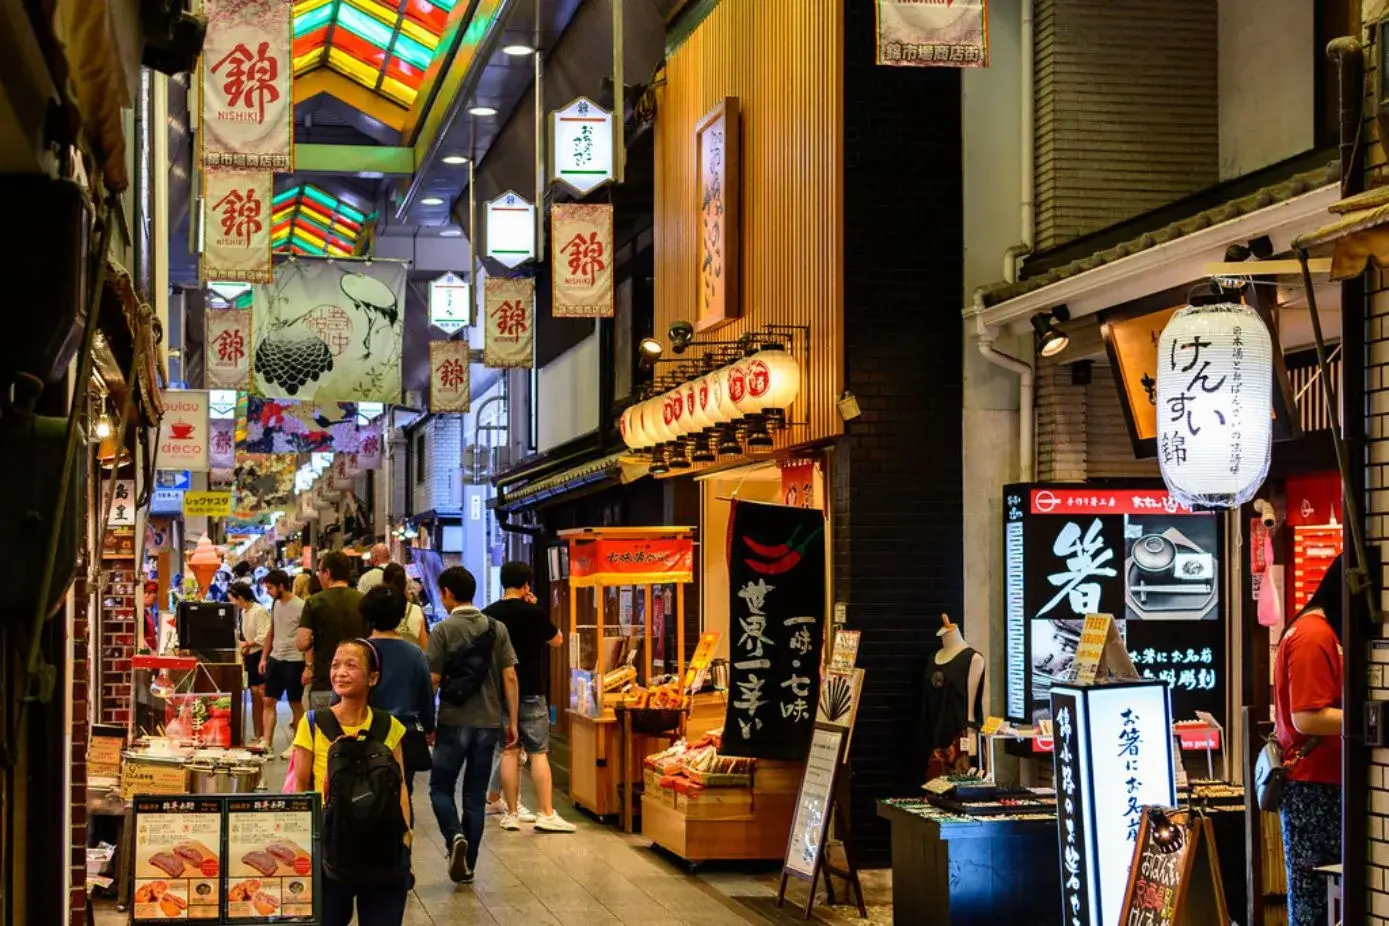 14 Best Things To Do In Kyoto - Nishiki Market